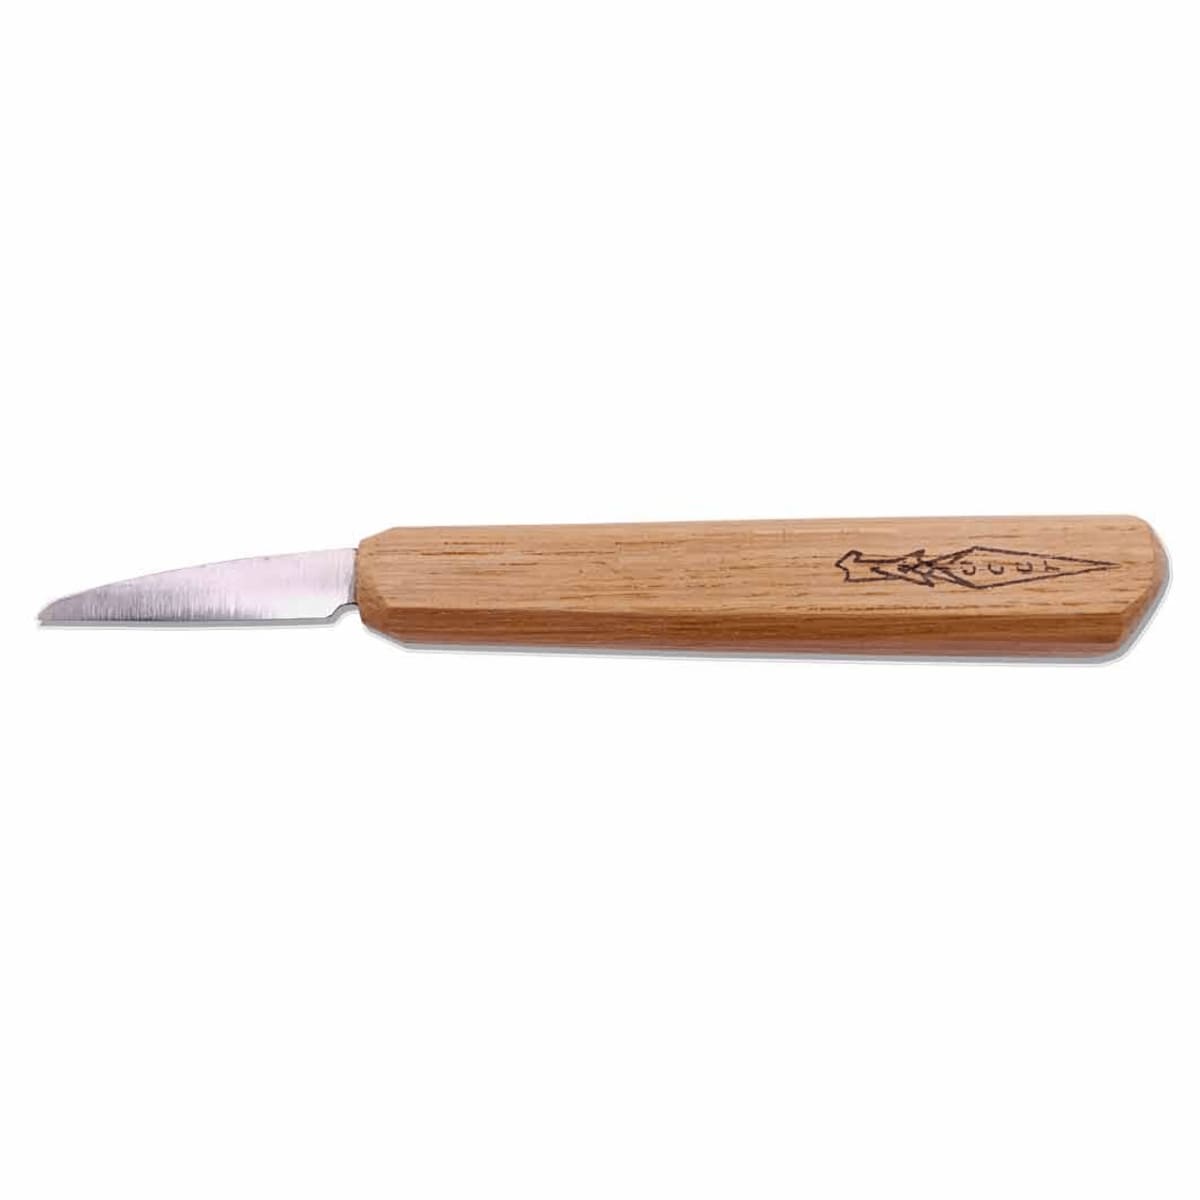 Straight Knife - The Best Wood Carving Knives - A Definitive Guide by ...